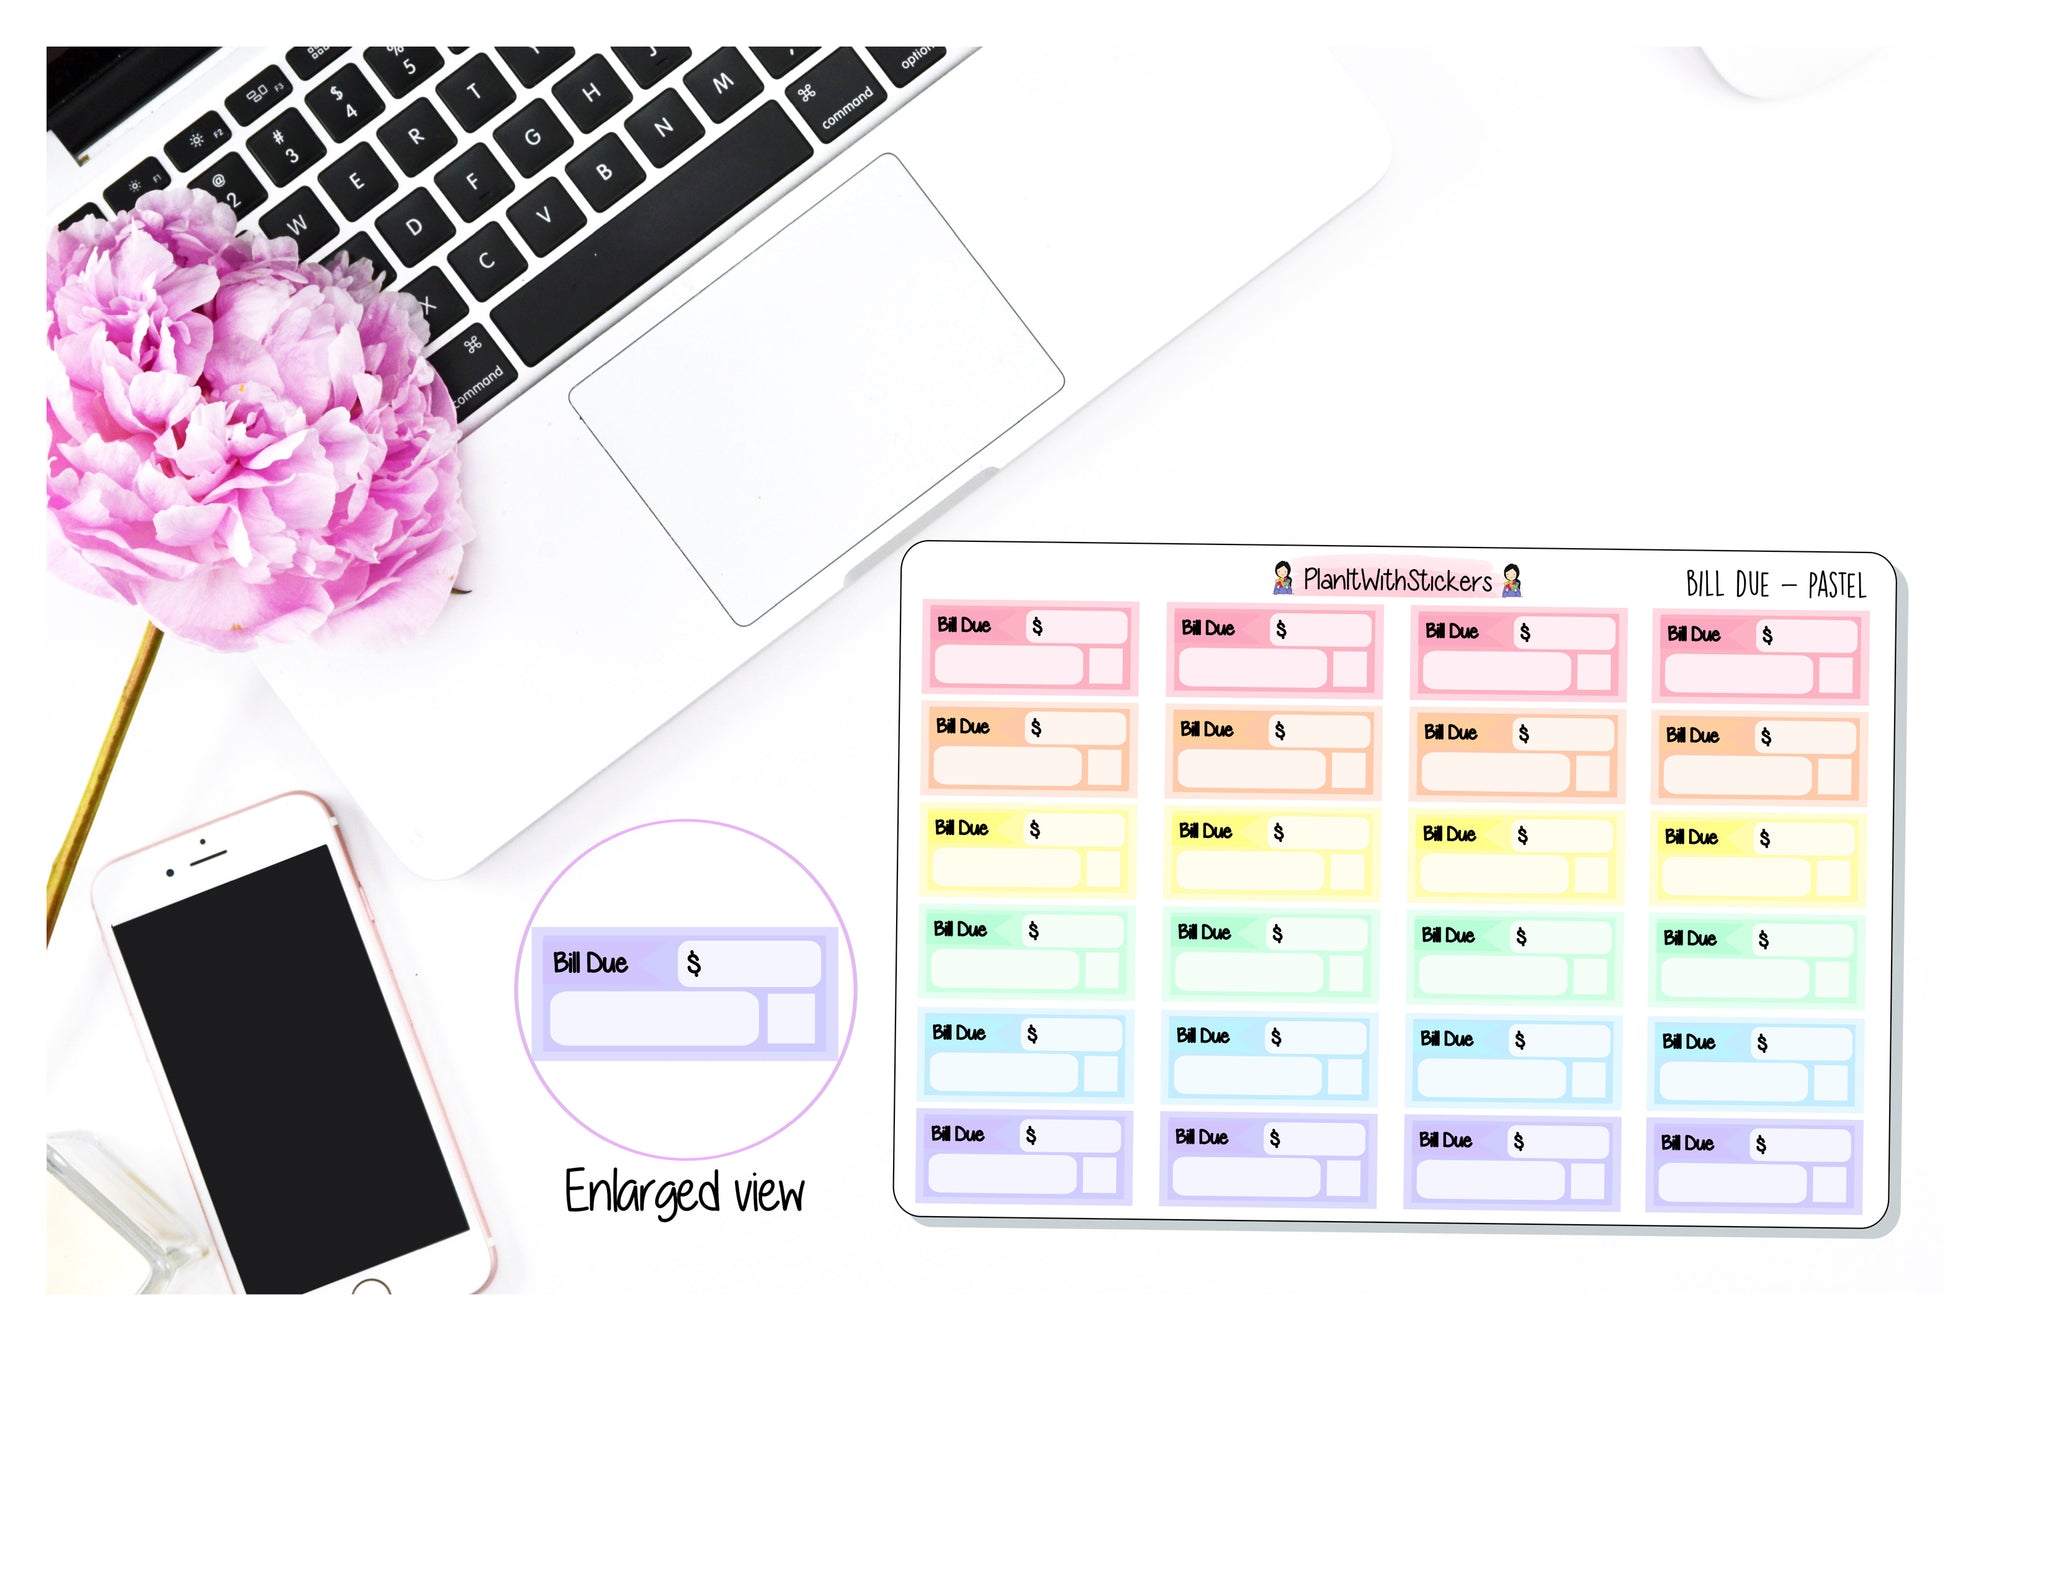 038 - PASTEL Bill Due Pay Bill Planner Stickers for , Plum Paper, Recollections, and similar planners